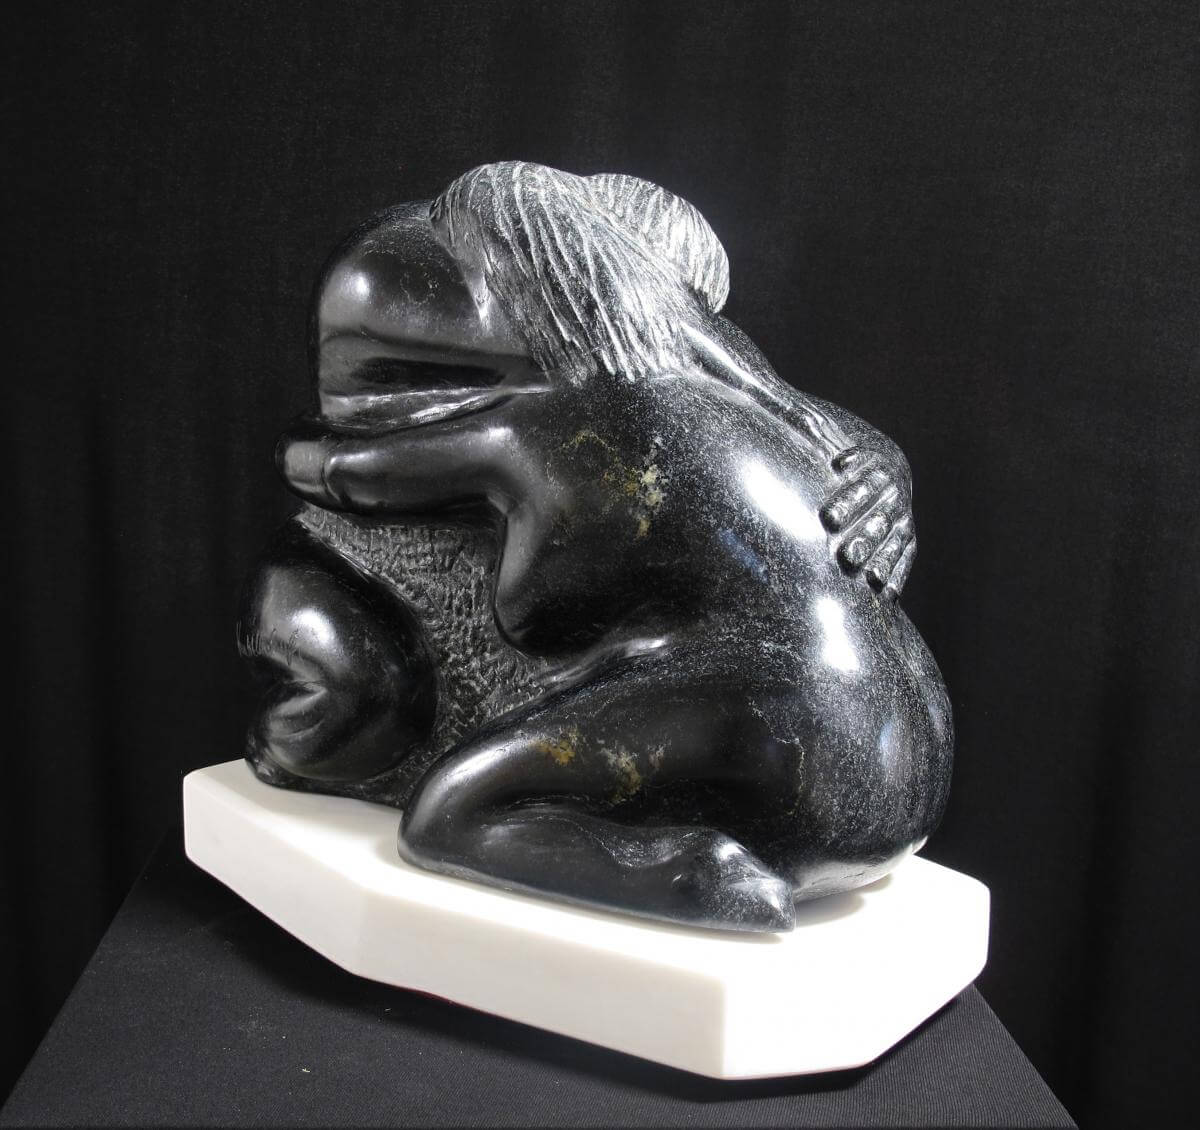 A black stone sculpture of a person hugging another